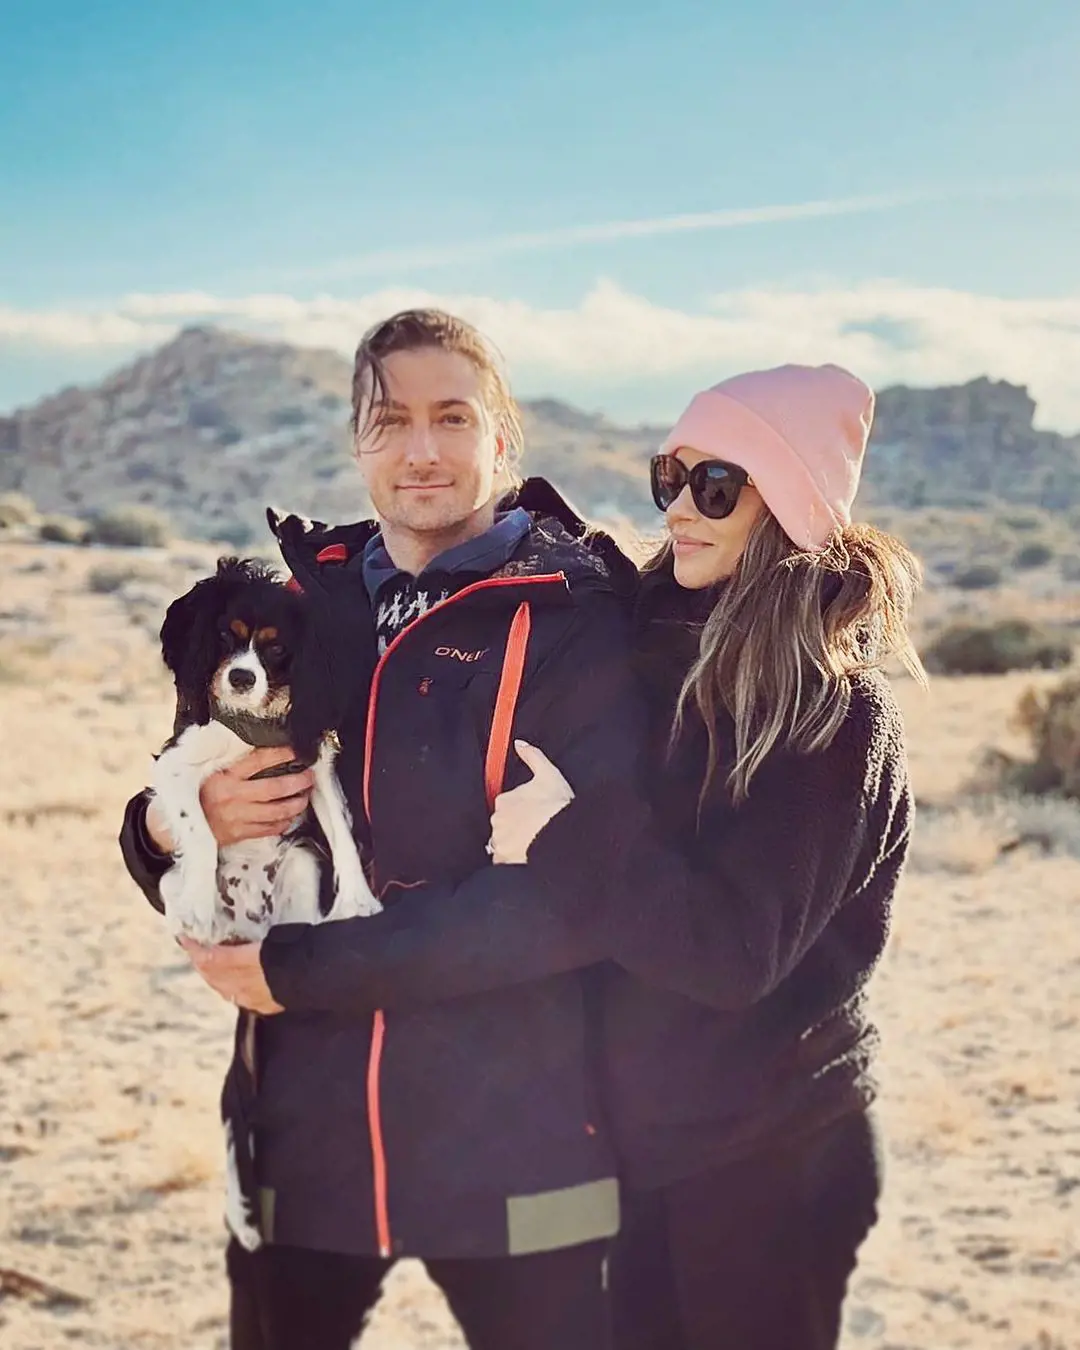 Daniel with his wife Nadia Lissing and dog Oscar